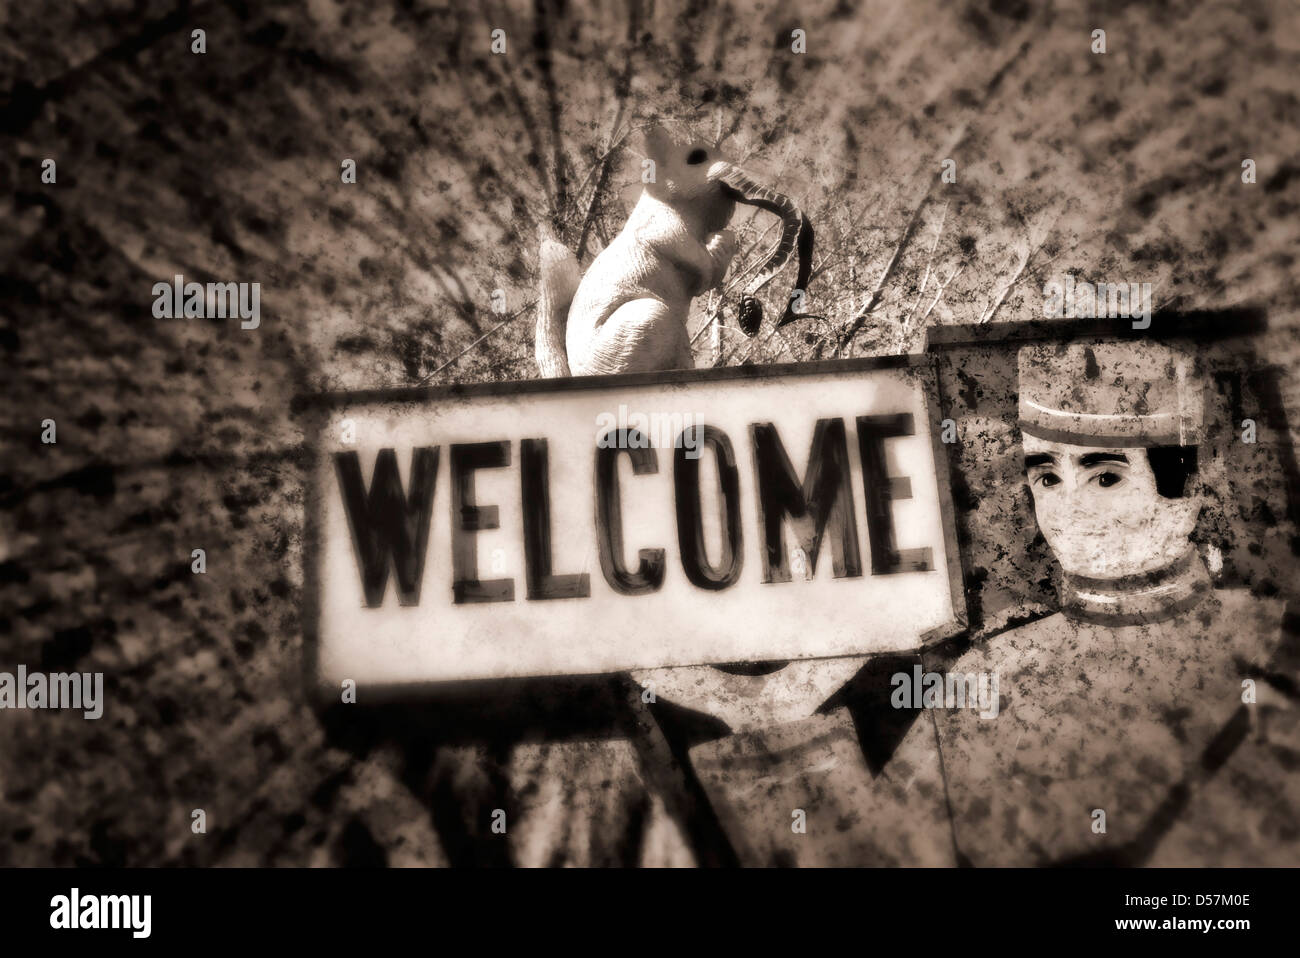 “Welcome” sign Stock Photo